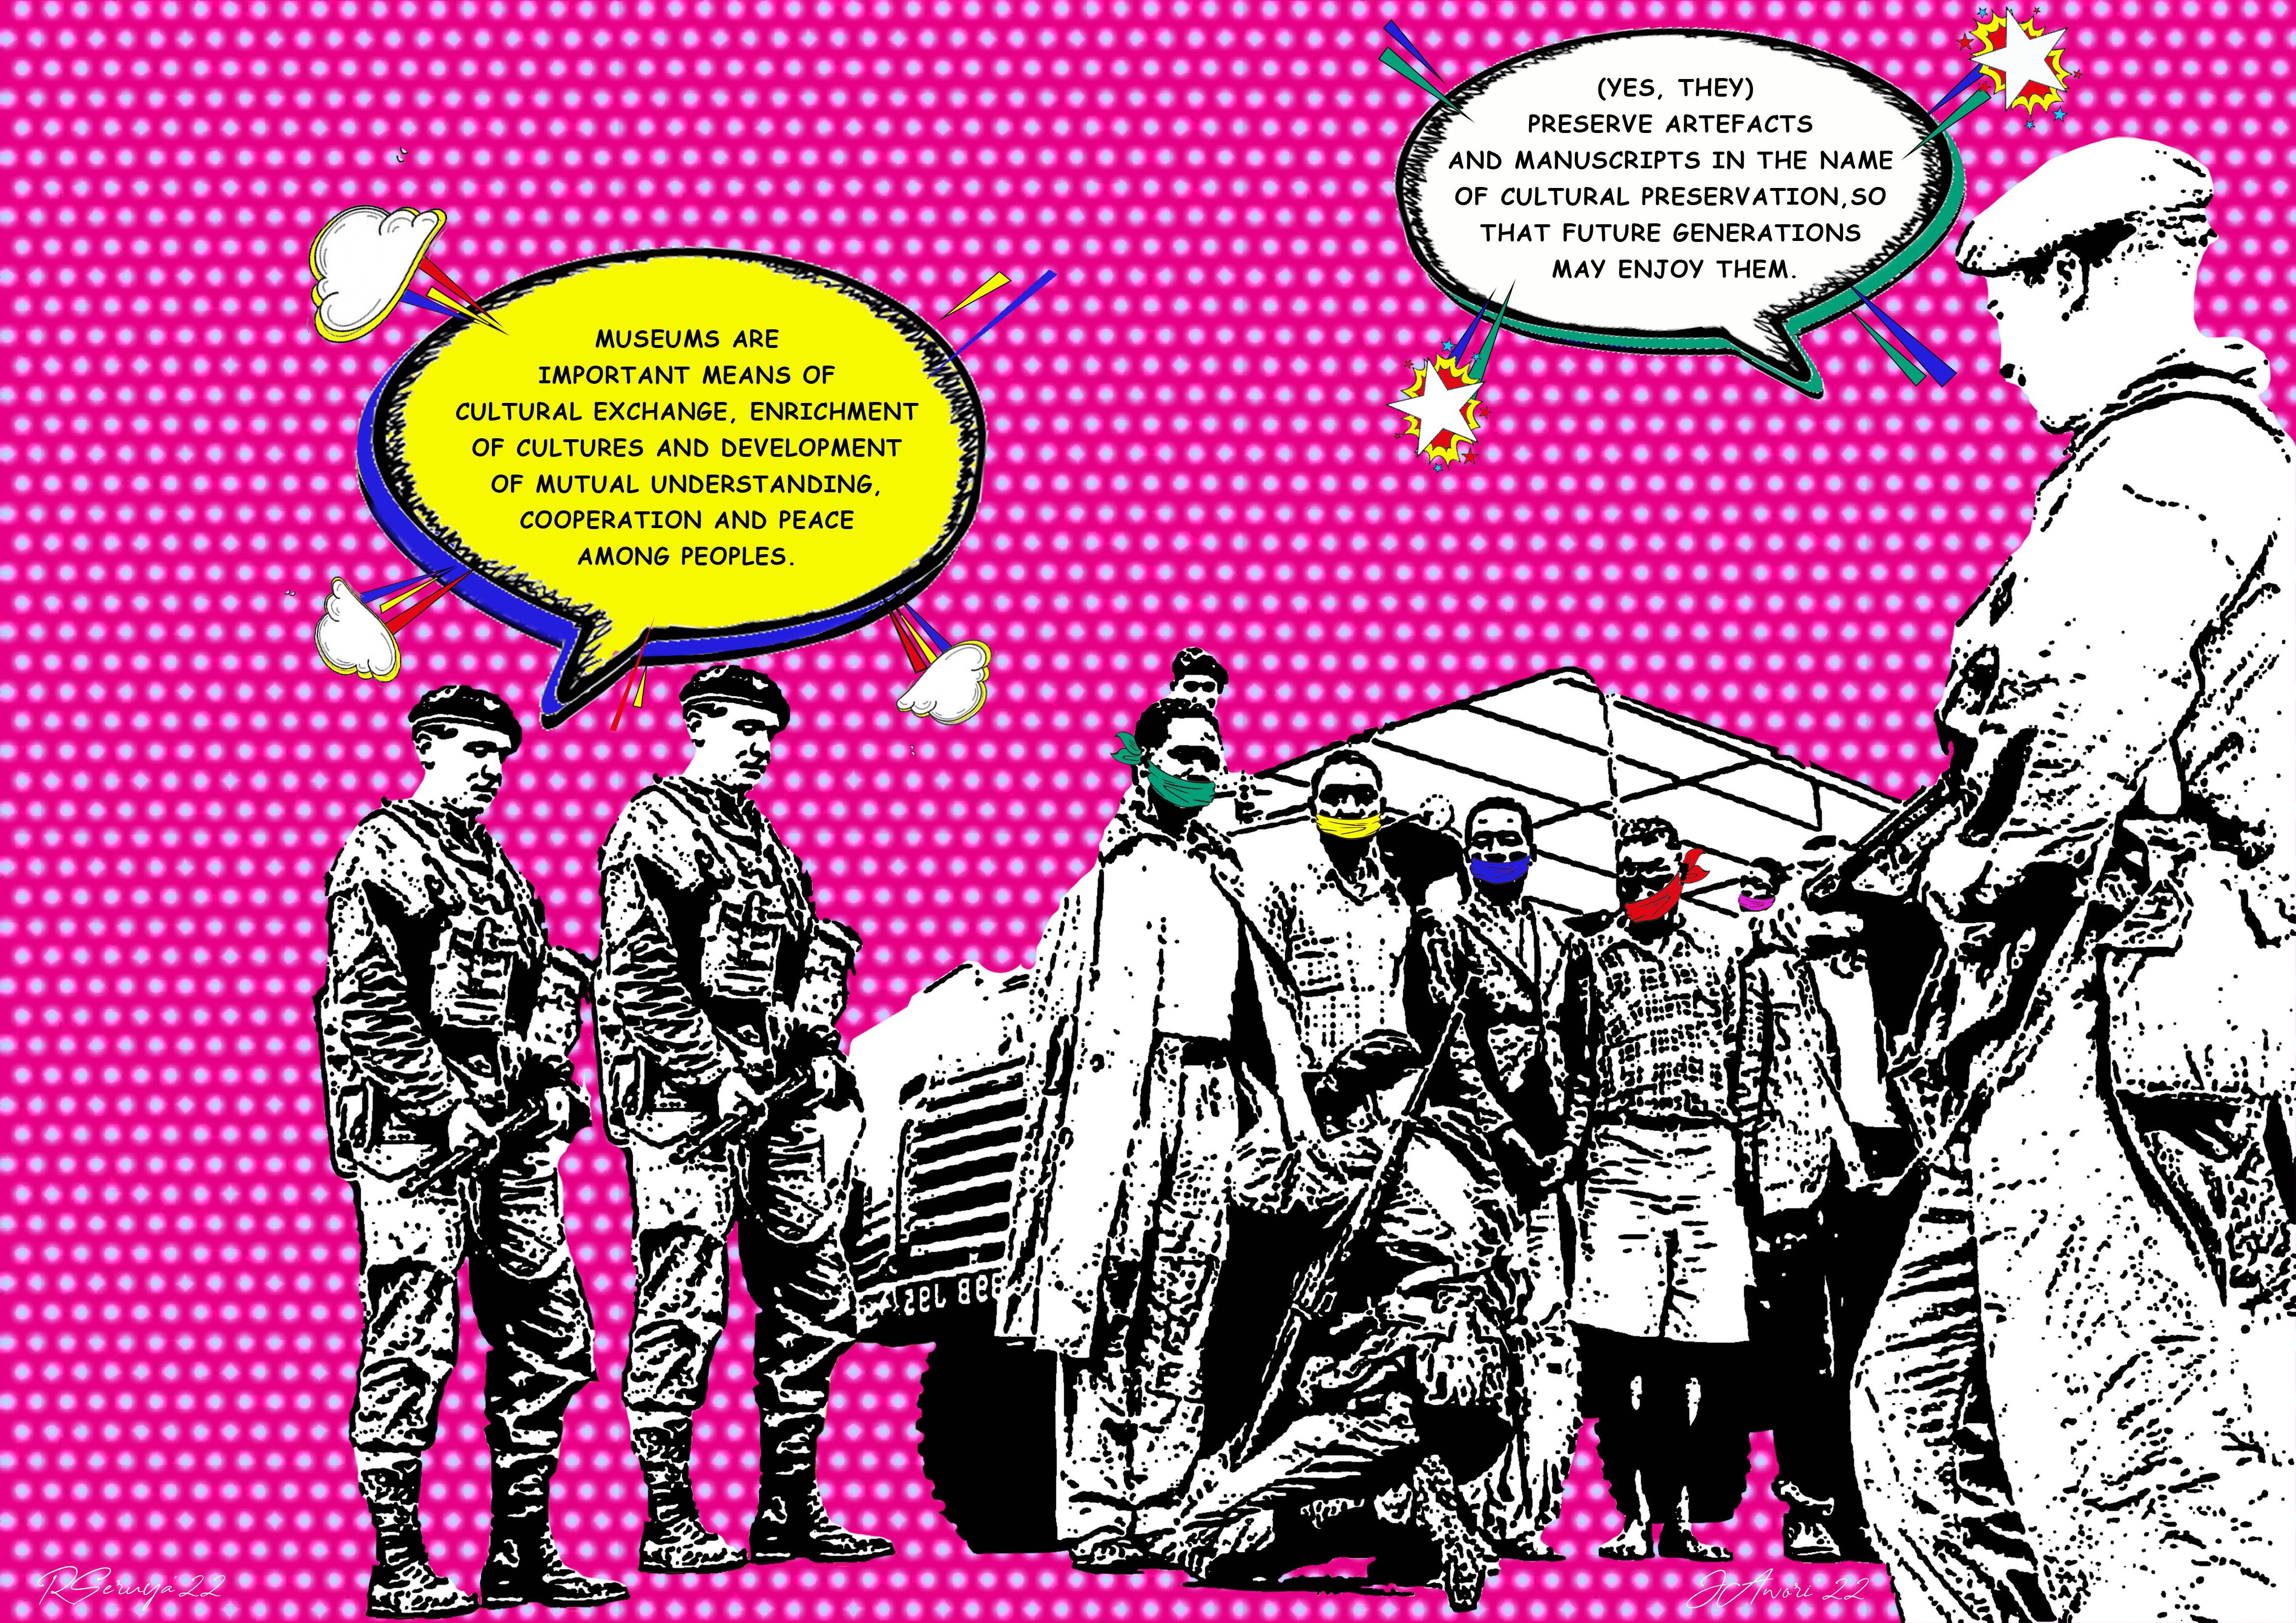 One-way conversation 4 (Image used: British soldiers inspecting the MauMau in Kenya)  (Text used: extract from the article "Repatriation: why Western museums should return African artefacts"  by Museum Next, quoting the International Council of Museums)